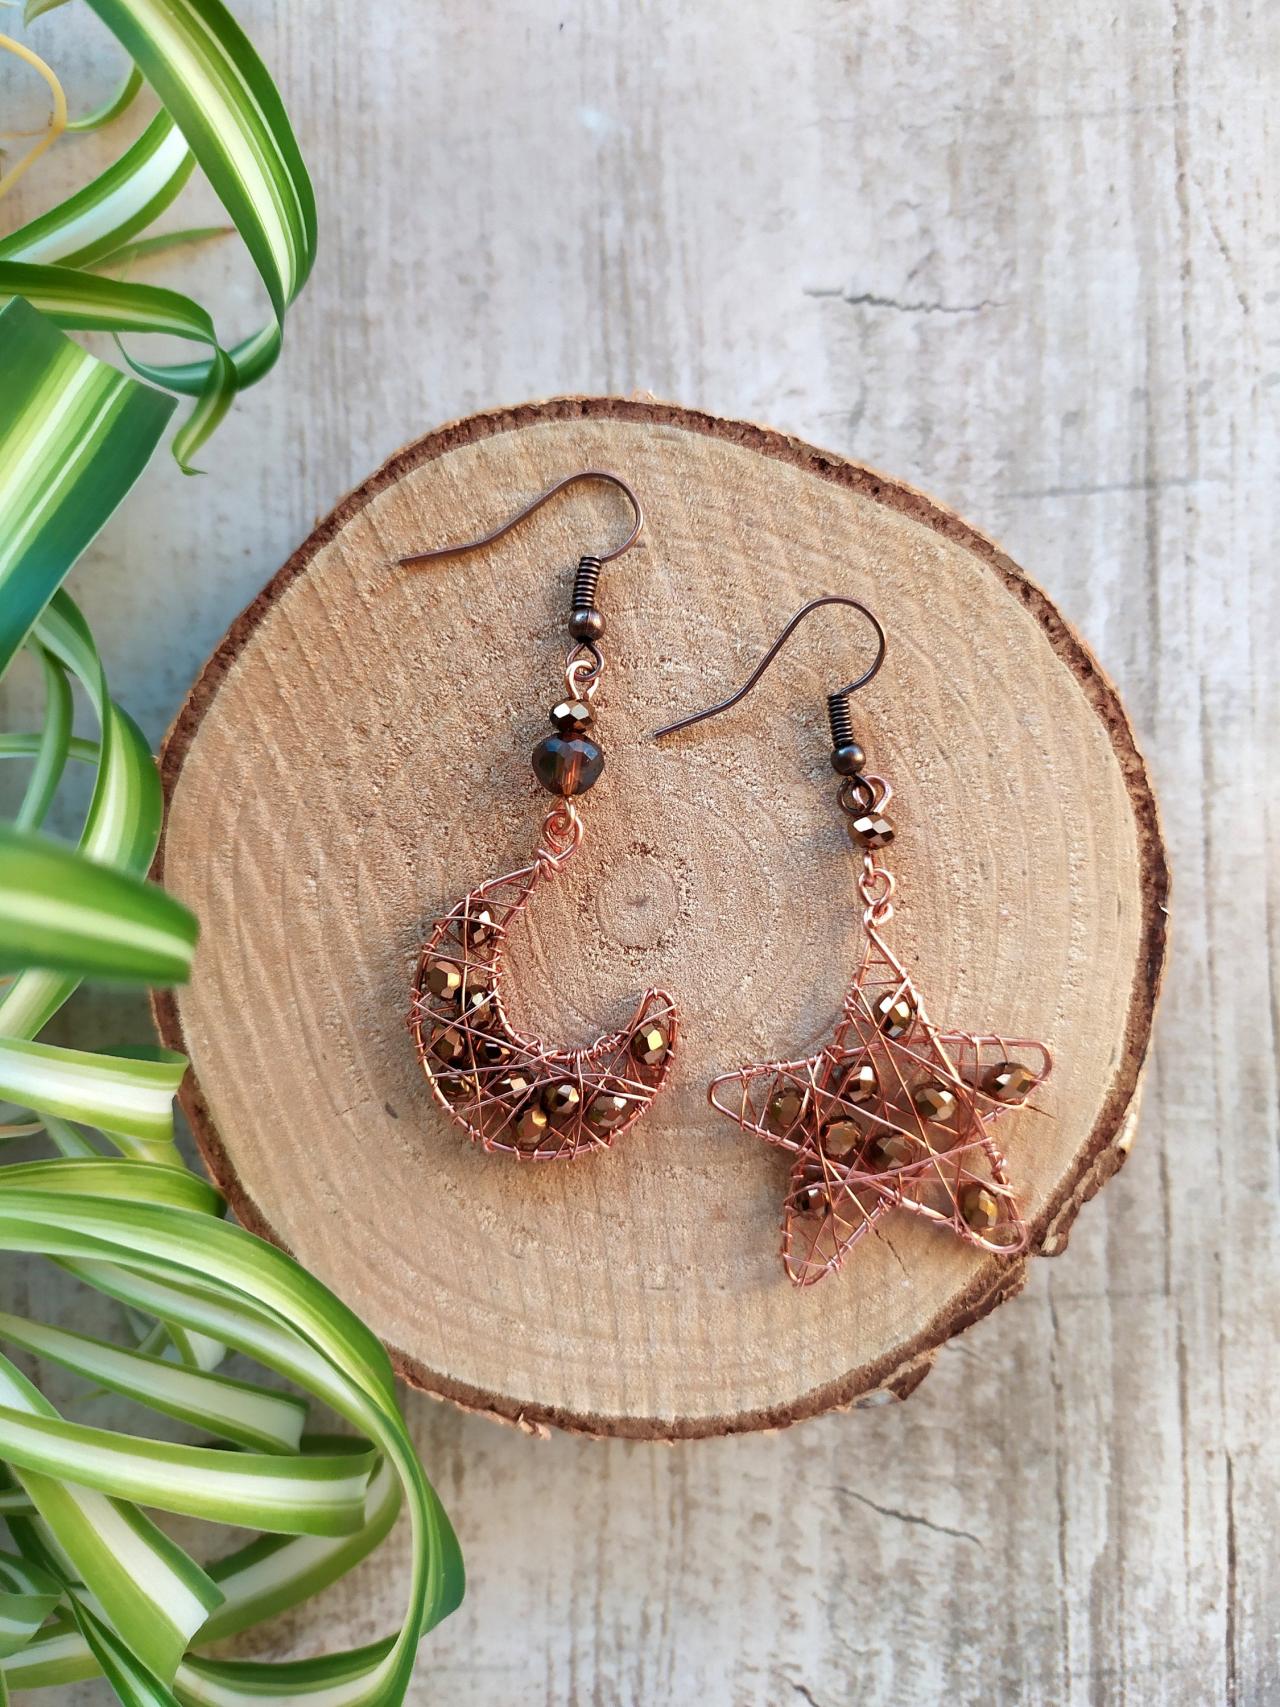 Celestial Collection: Copper Crescent Moon And Star Wire Wrapped Earrings, Brown Celestial Dangles, Mismatched Boho Wire Wrapped Earrings